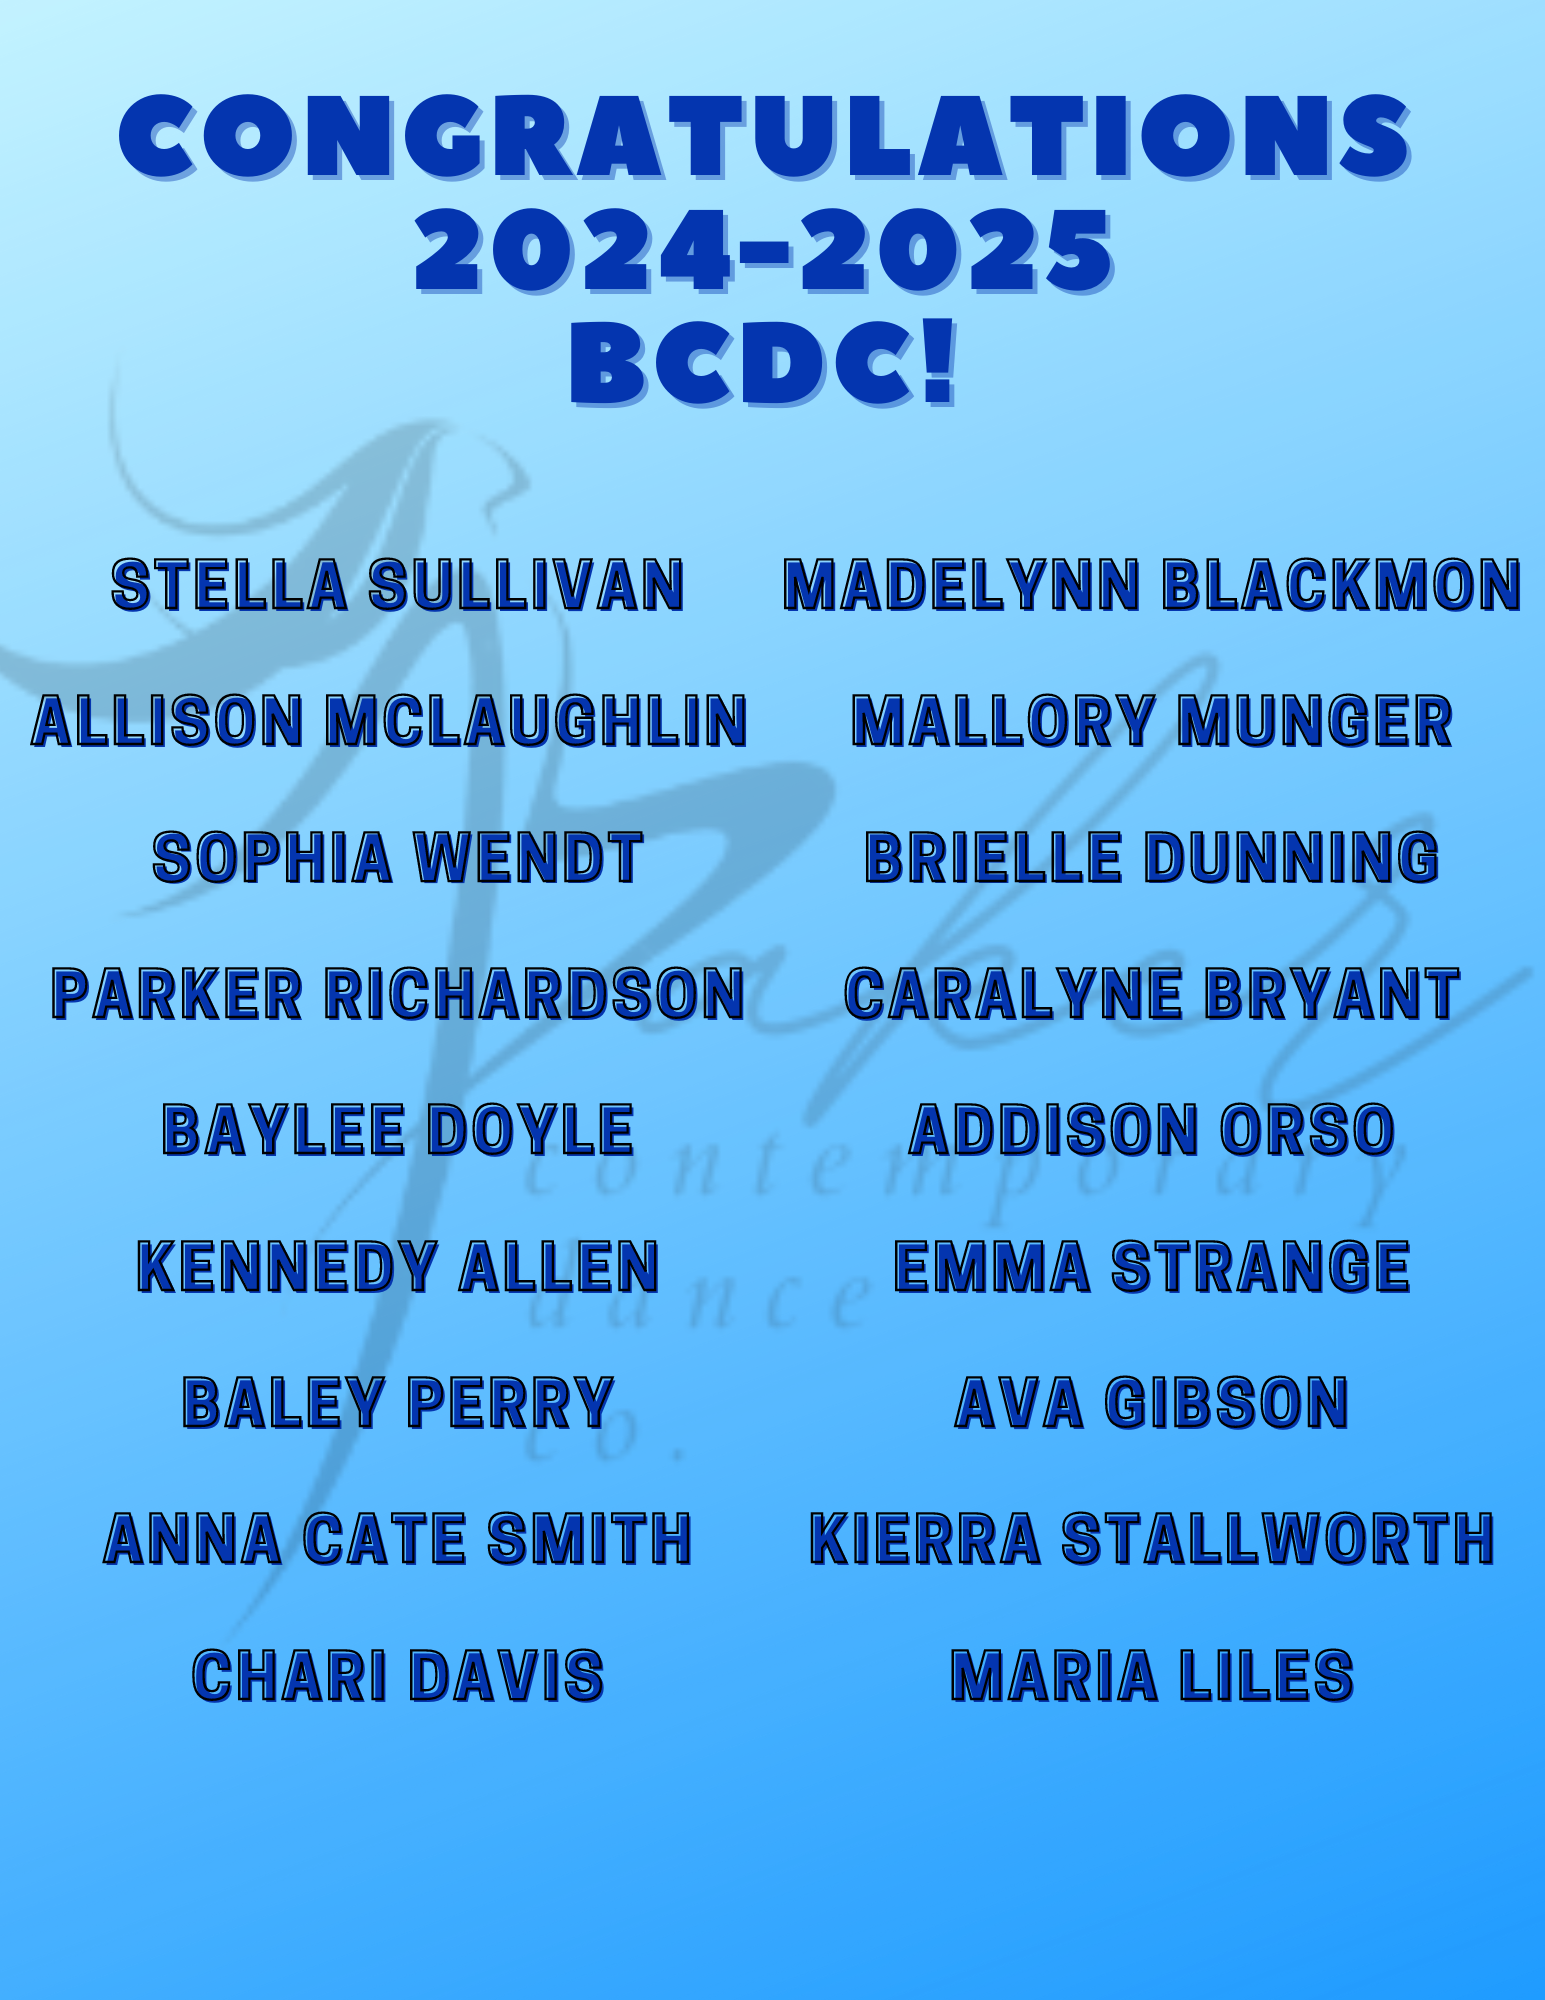 Congratulations to the 2024-2025 BCDC!